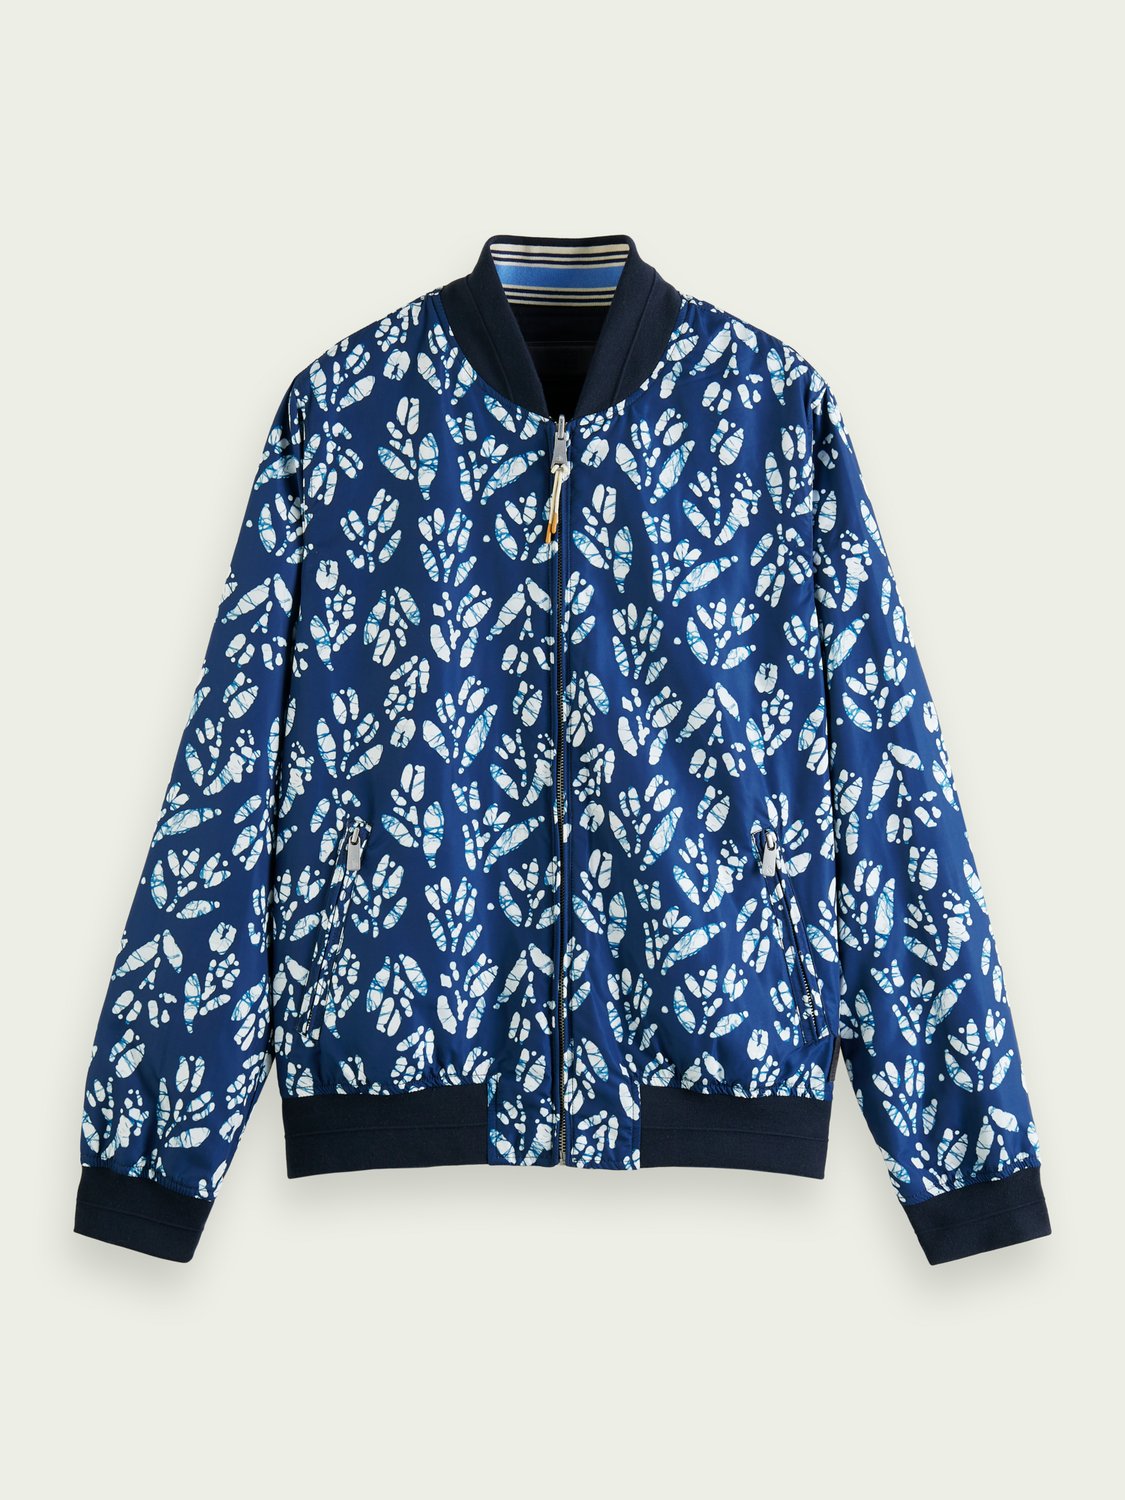 Scotch and Soda | Printed reversible bomber jacket in Combo D | Scotch ...